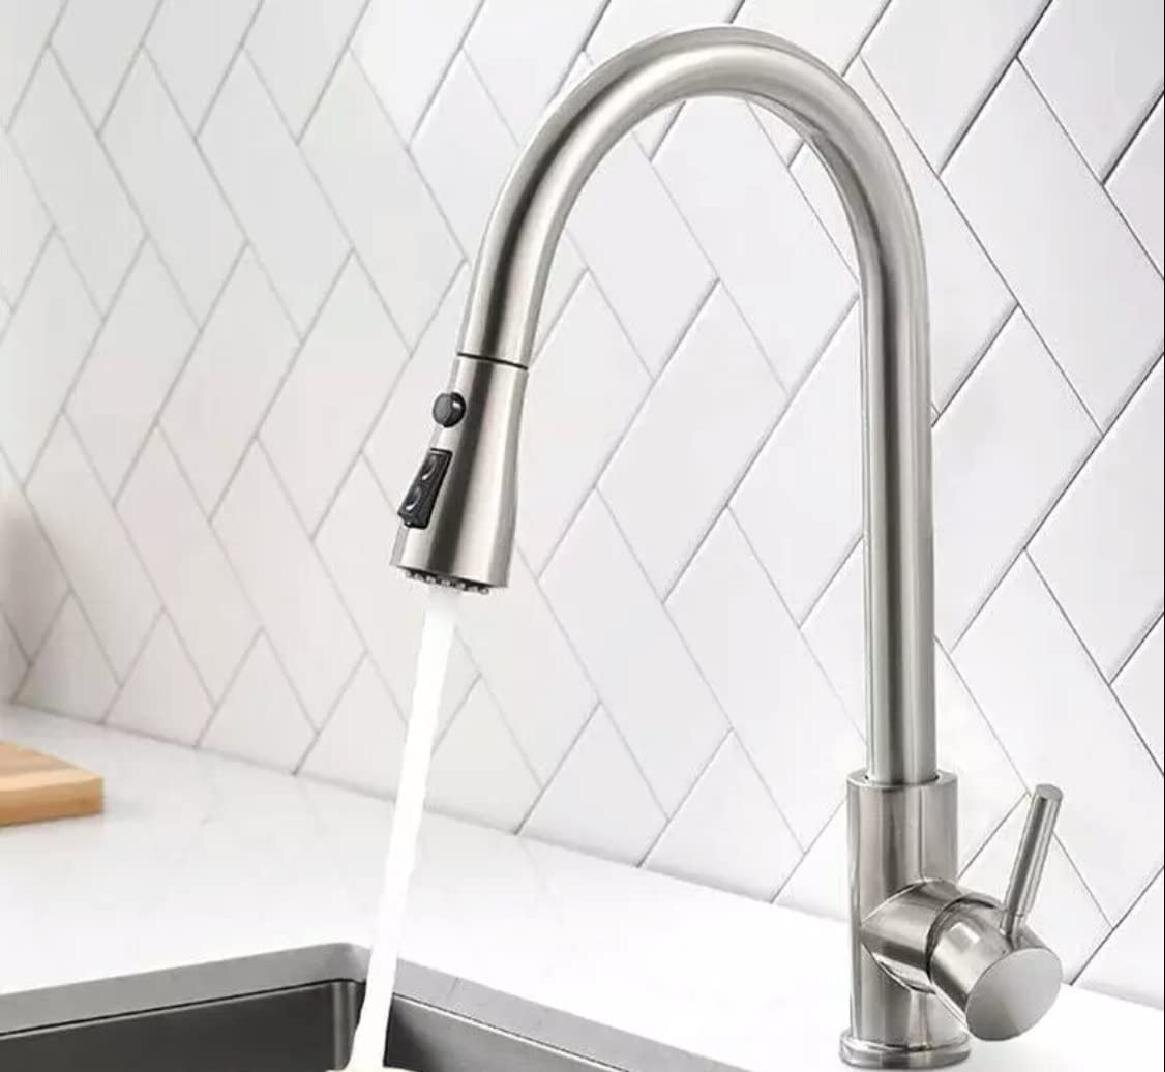 Kitchen Sink Faucet Kitchen Faucets with Pull Down Sprayer Kitchen Faucet Silver 360 Swivel High Arc Pull Out Faucet Head Commercial Faucets with Deck Plate for 1 or 3 Hole